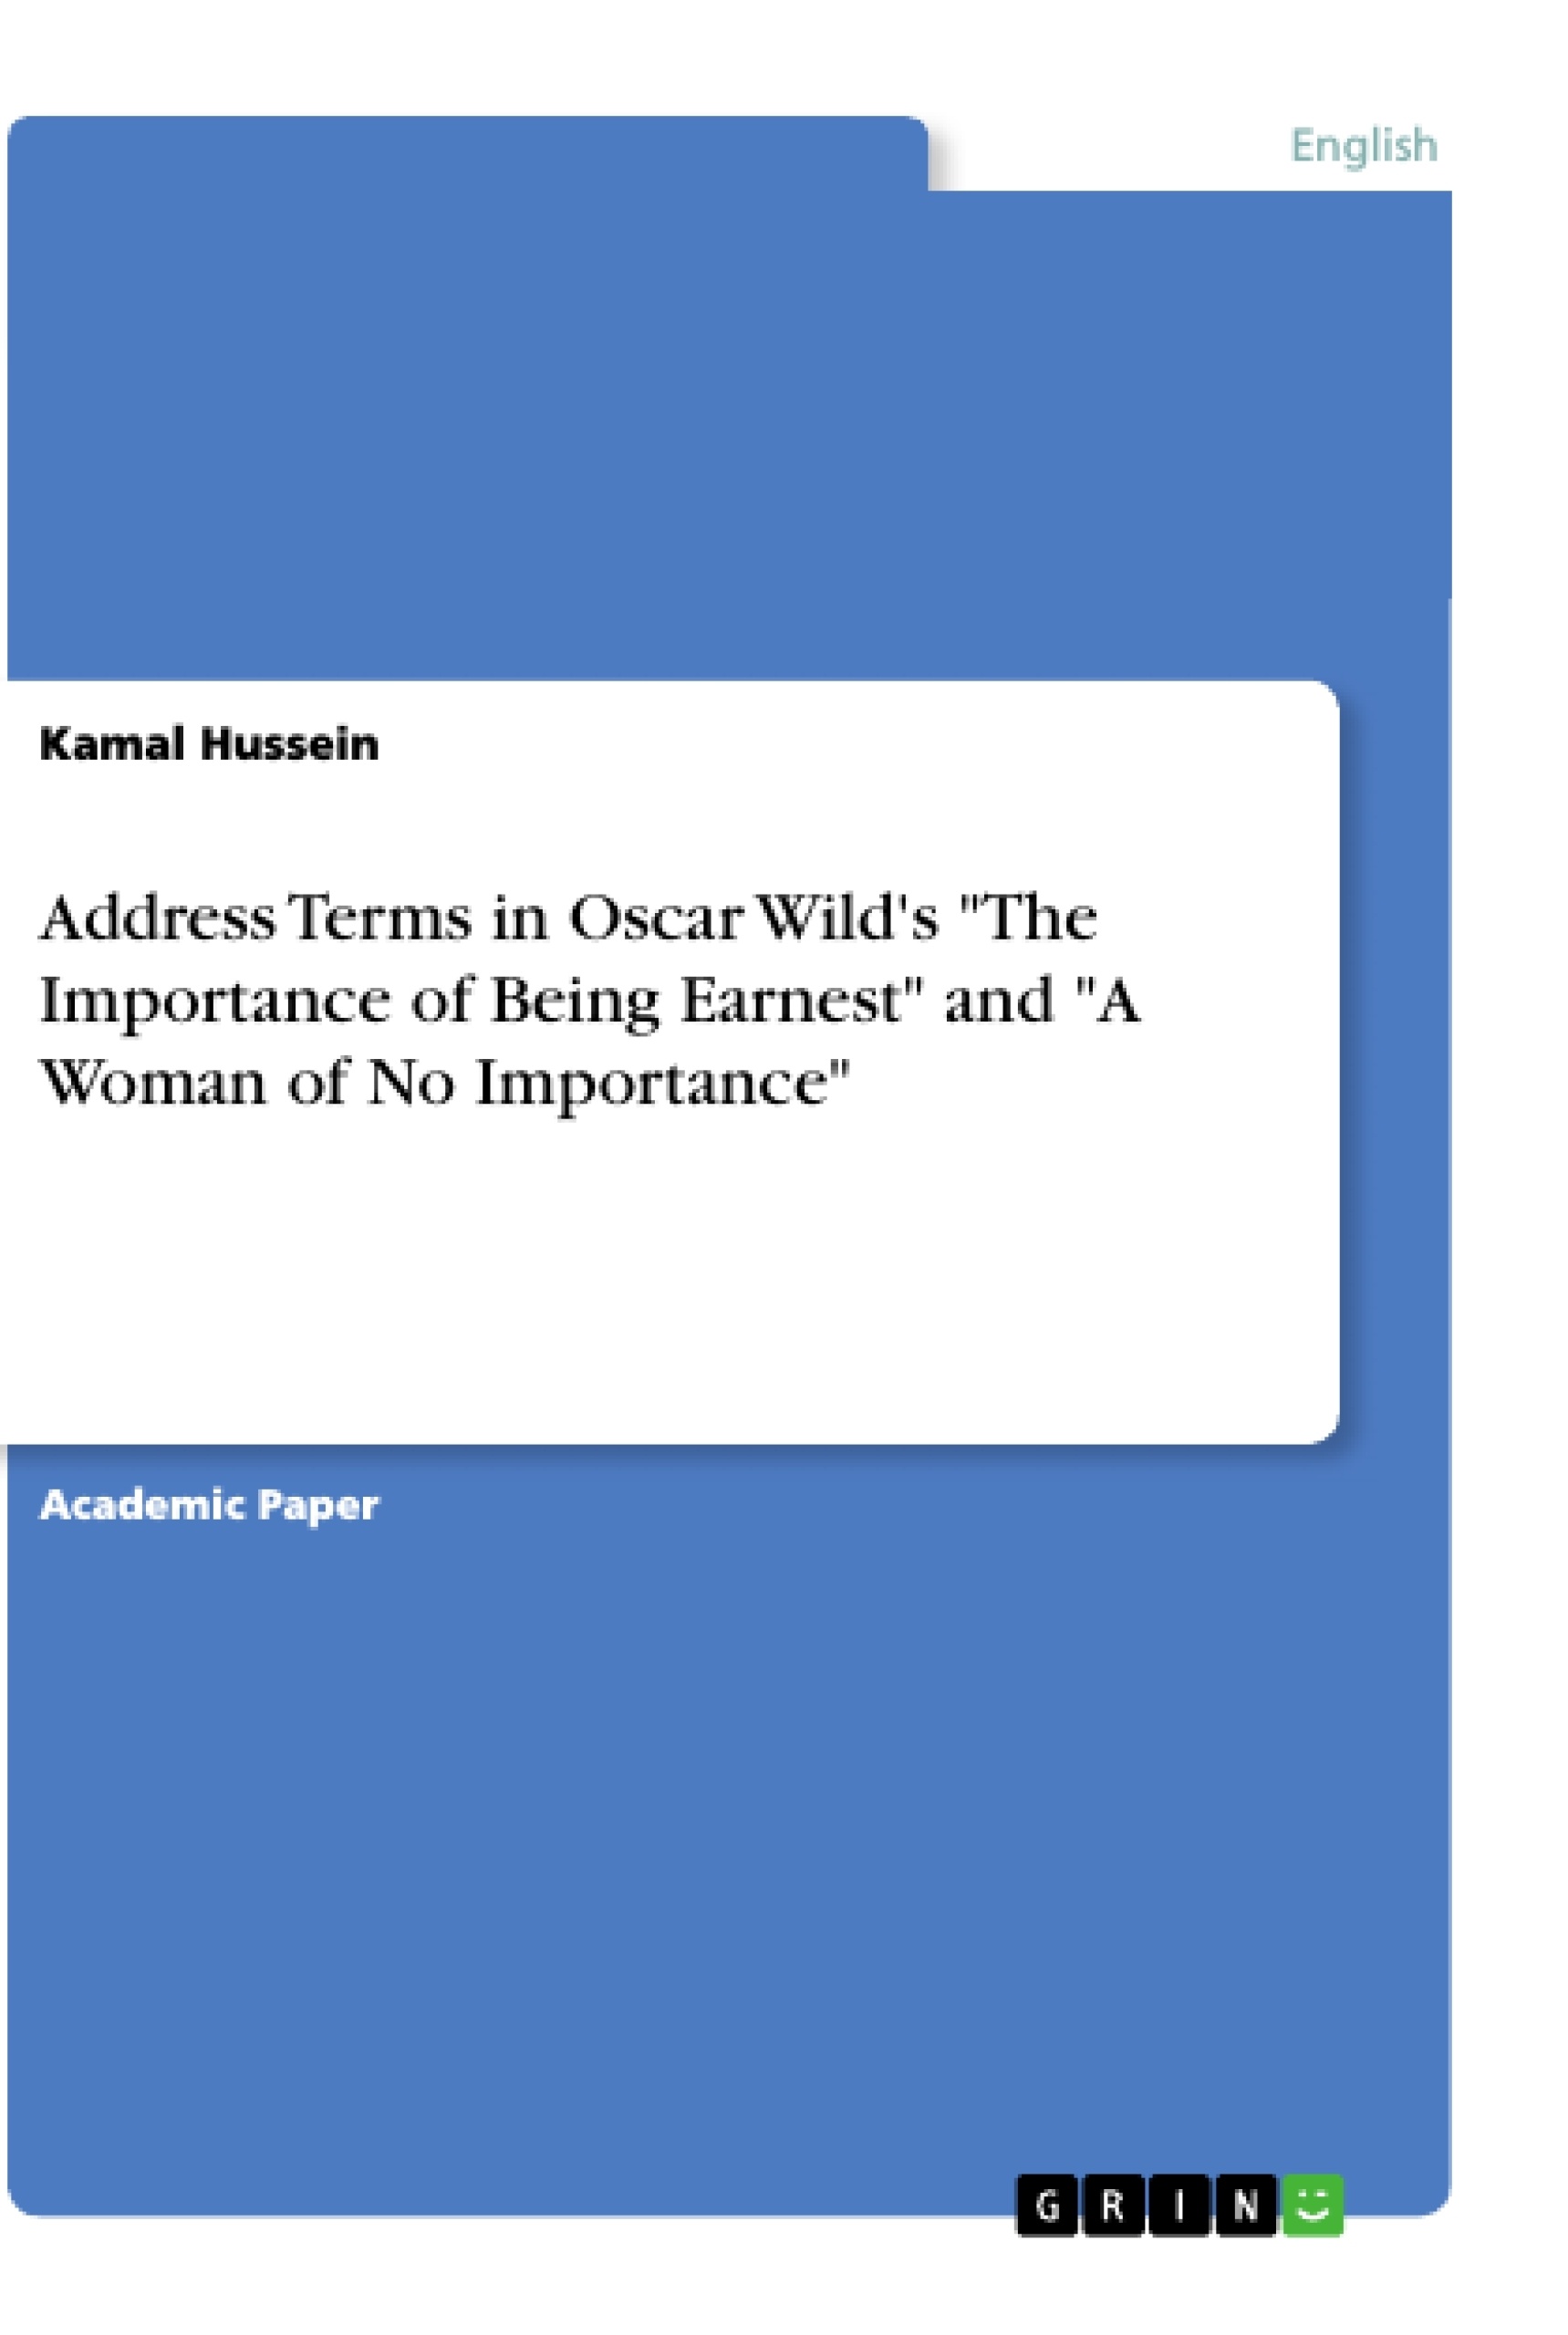 Title: Address Terms in Oscar Wild's "The Importance of Being Earnest" and "A Woman of No Importance"